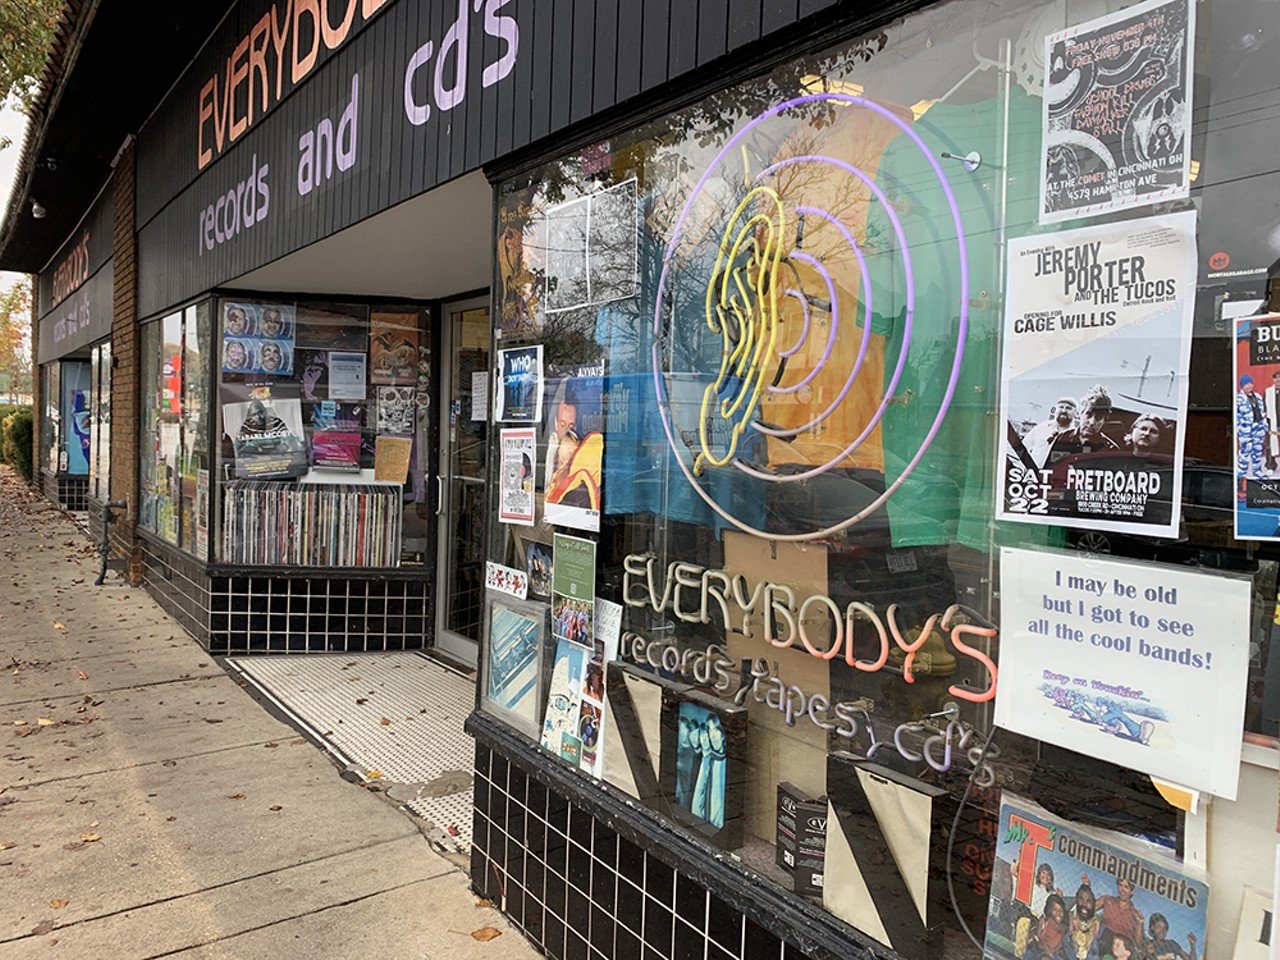 Everybody’s Records
6106 Montgomery Road, Pleasant Ridge
With an expansive collection of new and used records, the independent Everybody’s Records has impressed music fans in the Cincinnati area for more than 40 years. Peruse the wide selection of vinyl covering genres from rock, pop and reggae to jazz, rap and country, plus find albums by local acts. Leave
time to browse the CDs and cassettes to reveal long-lost favorite tunes you grew up listening to. Not only is this shop jam-packed with music, but you’ll also find band T-shirts and custom Everybody’s pieces.